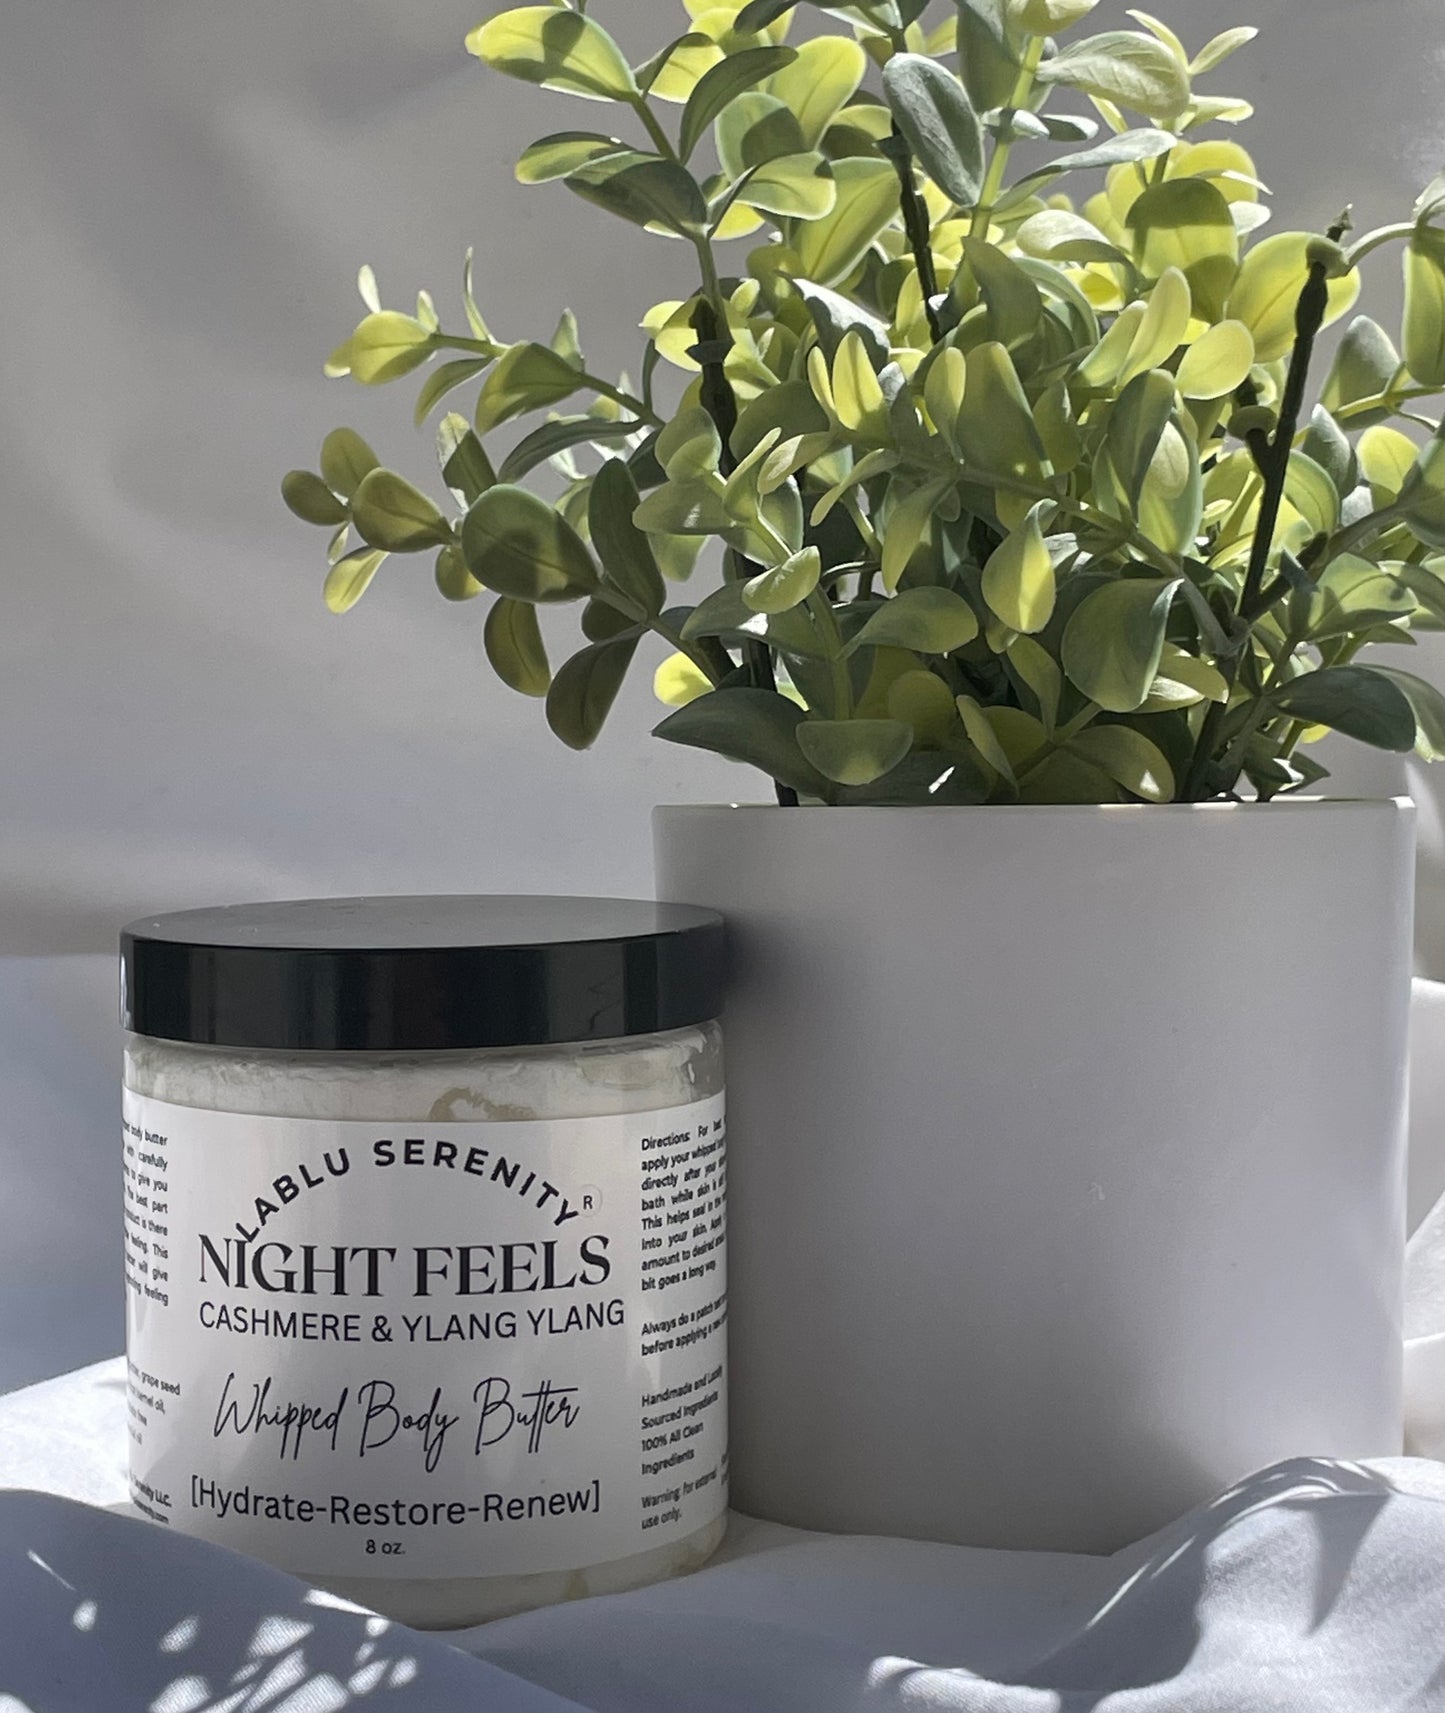 NIGHT FEELS WHIPPED BODY BUTTER (cashmere & ylang ylang scent)